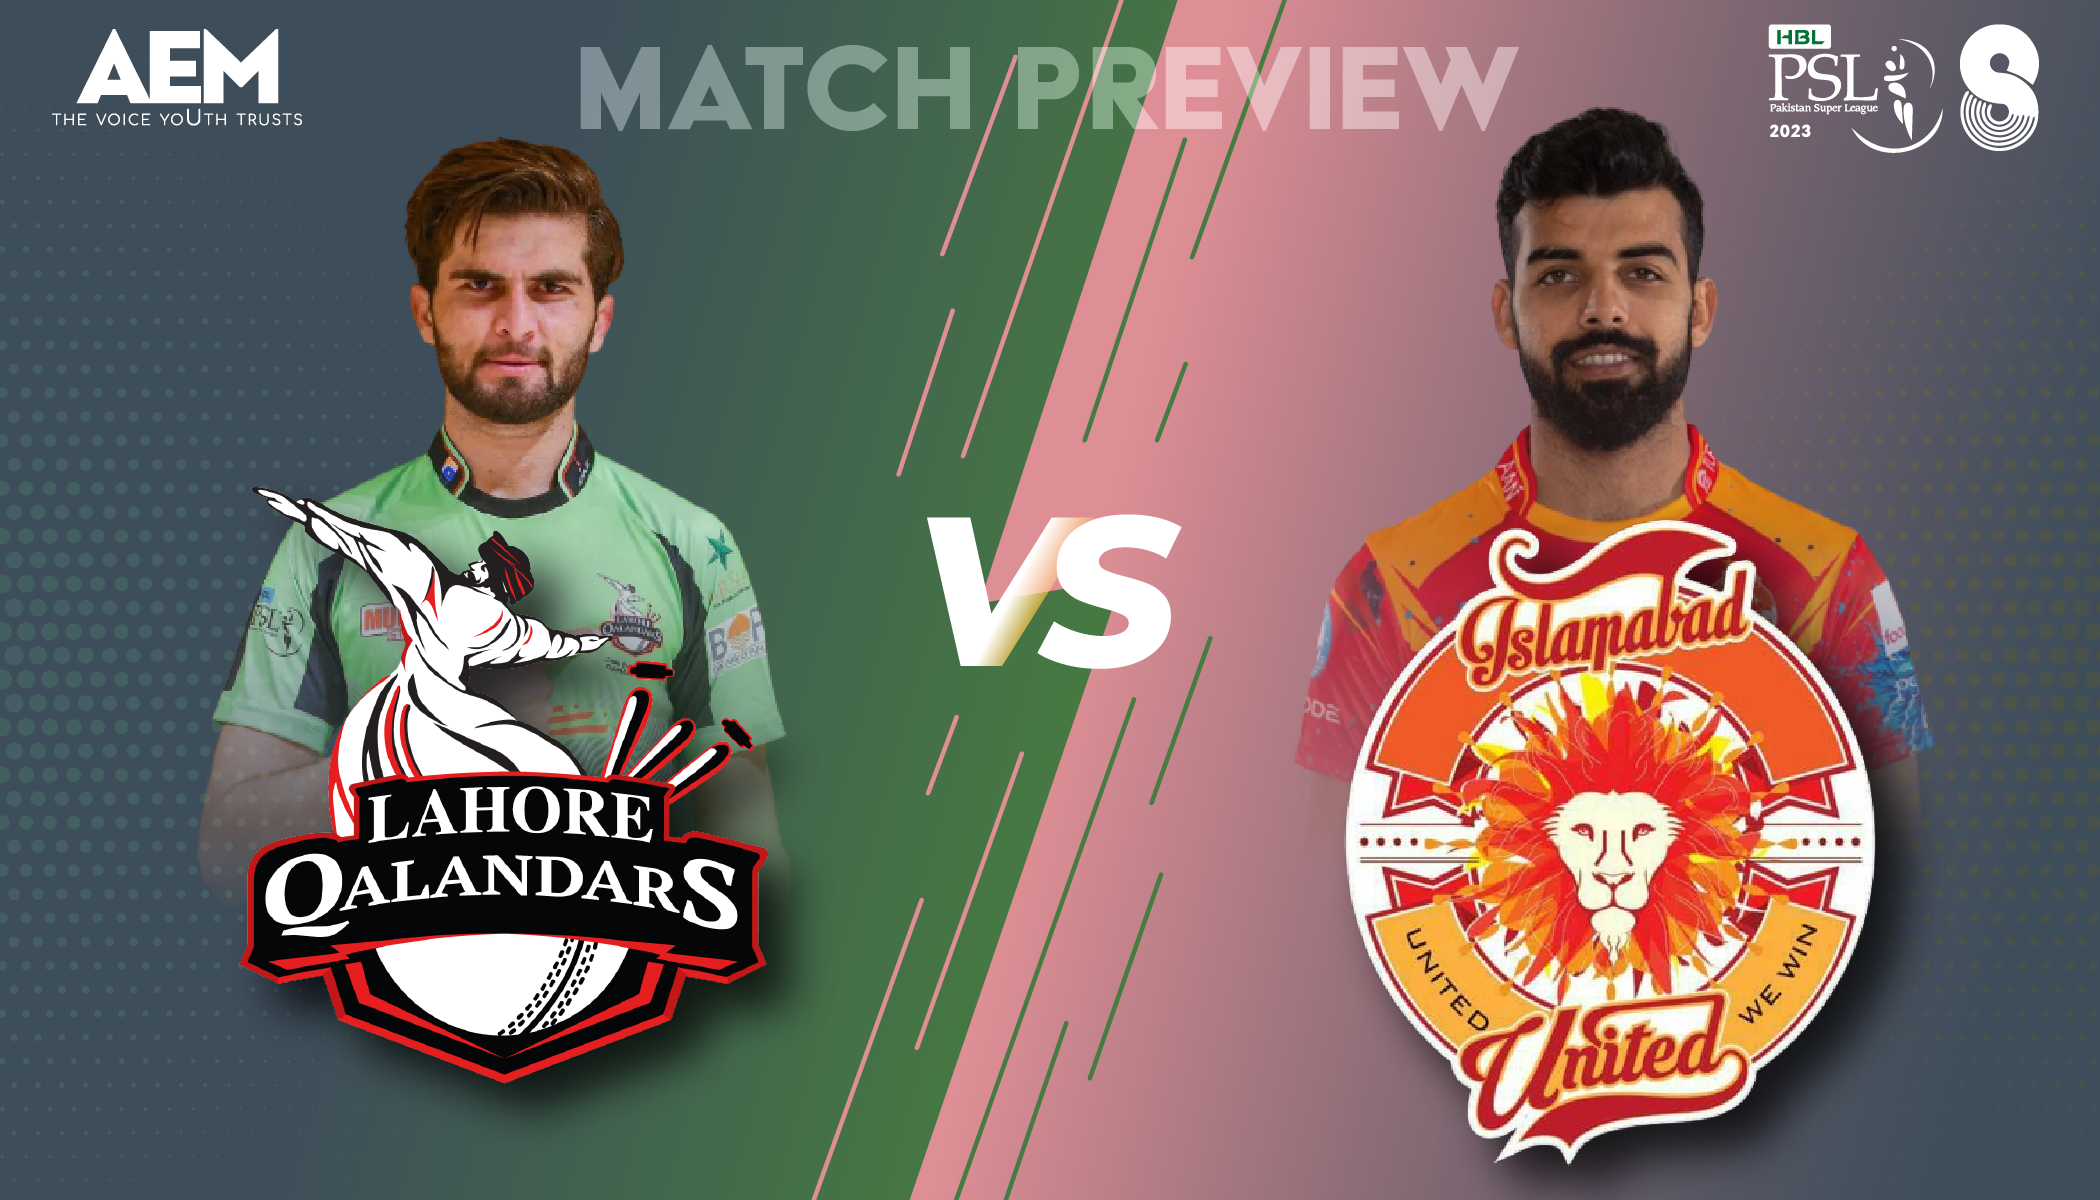 Match Preview of Lahore Qalandars VS Islamabad United